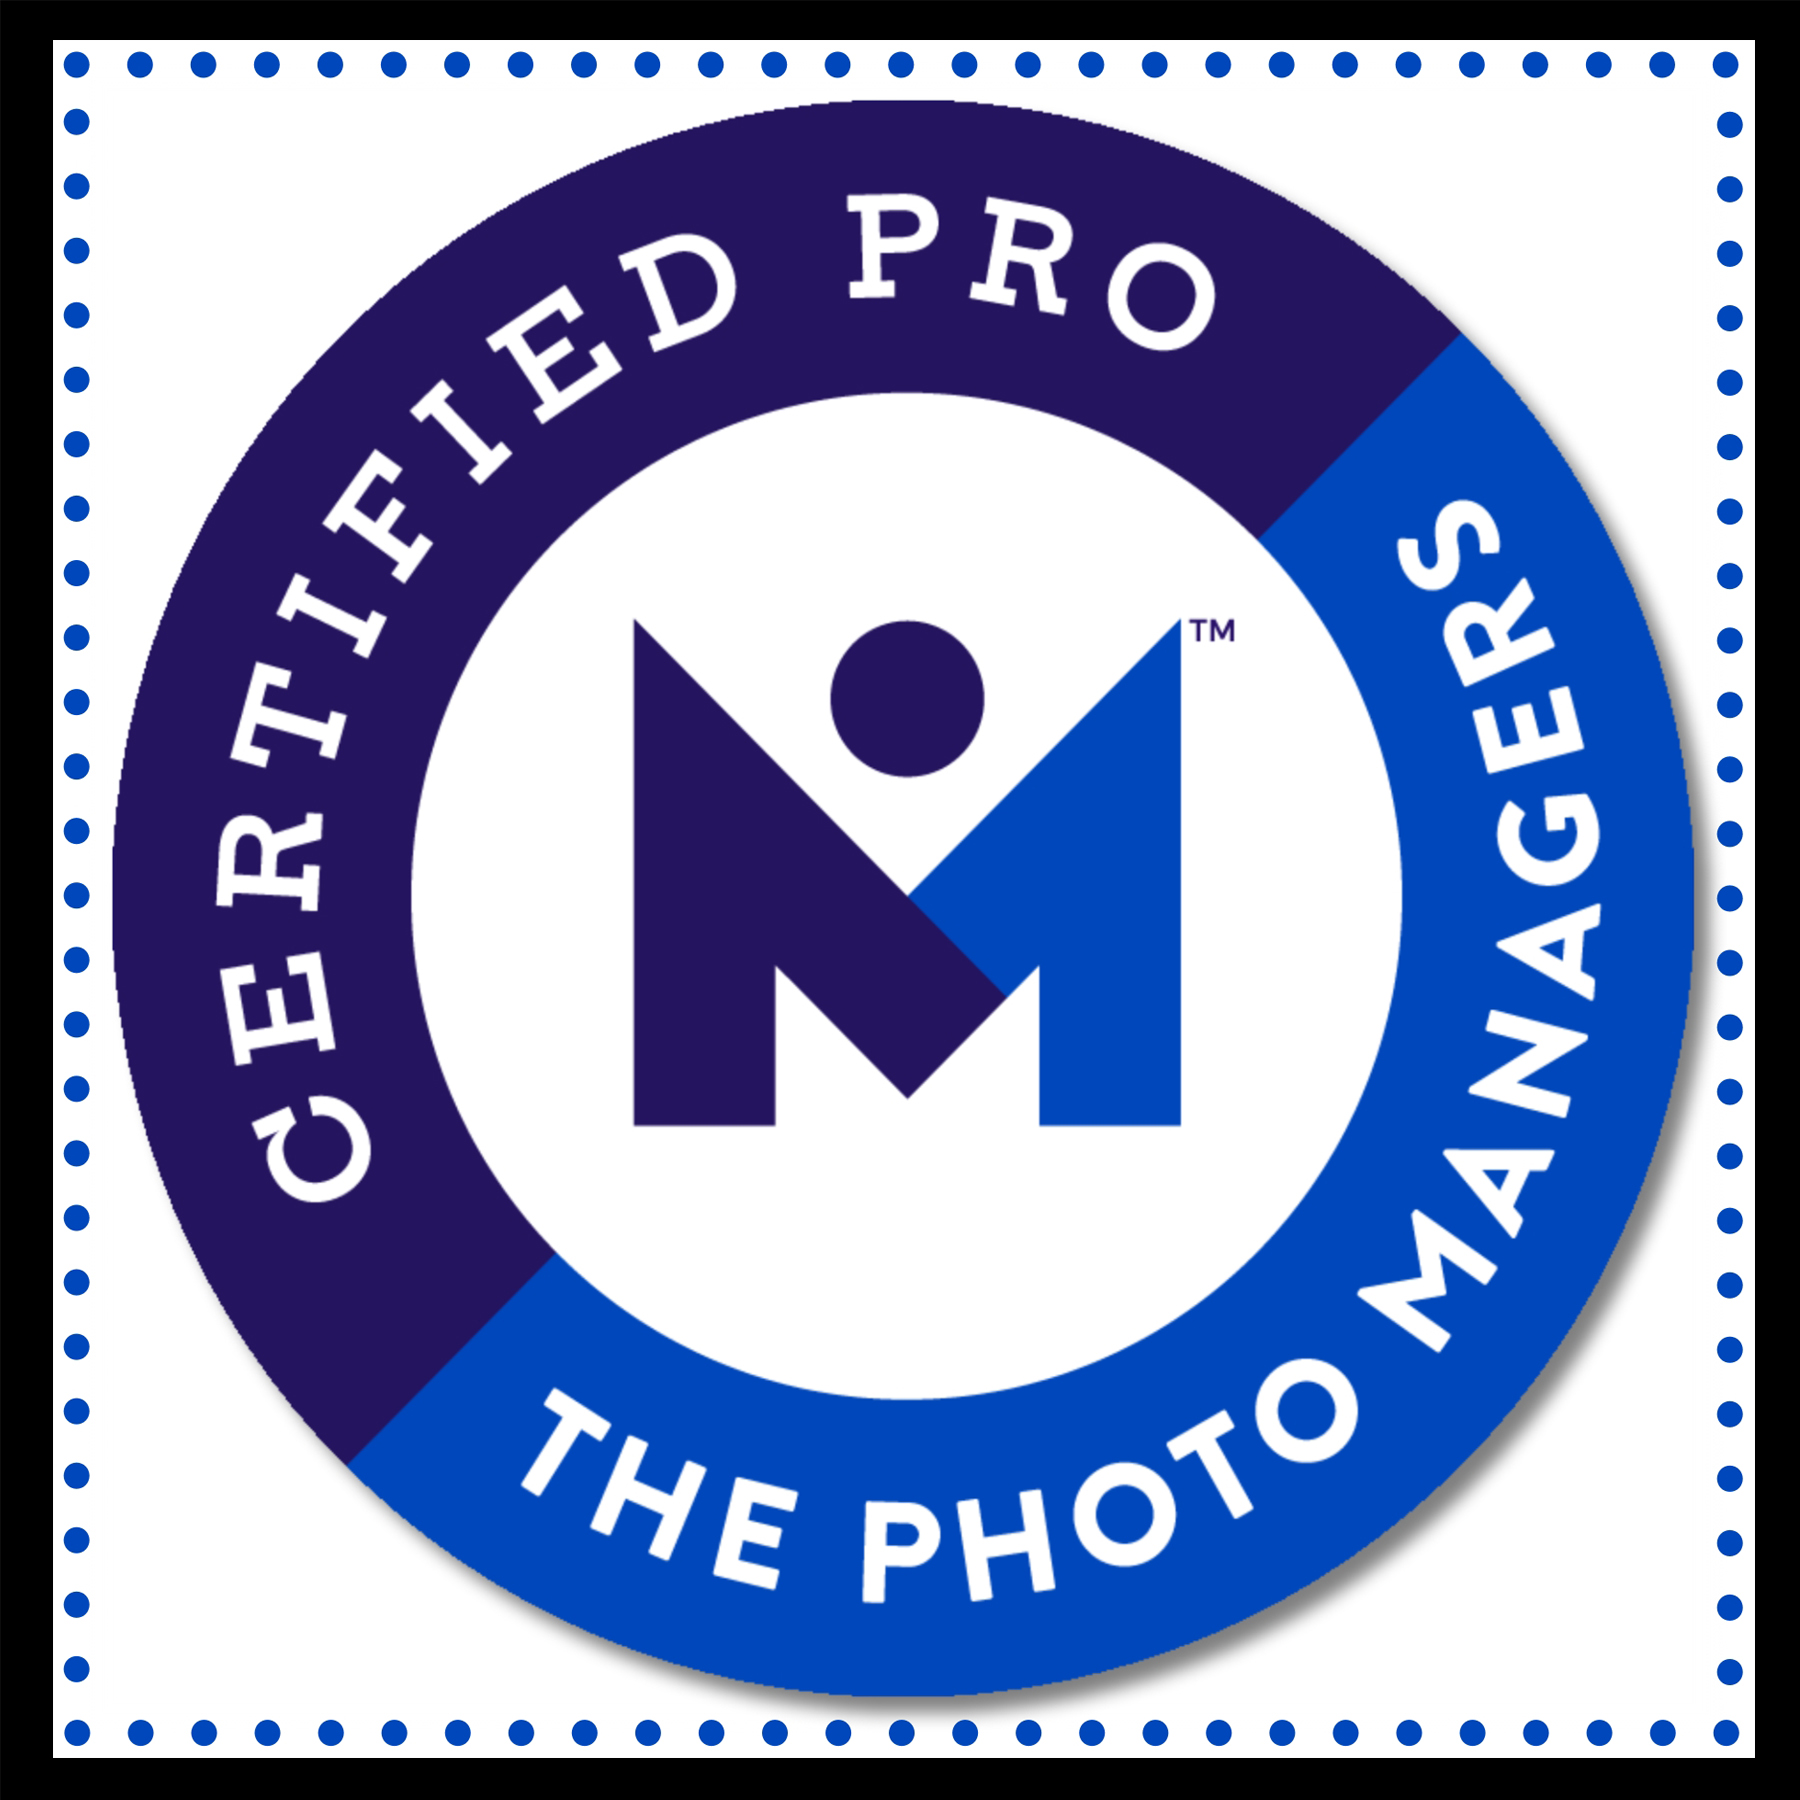 Certified Pro - The Photo Managers